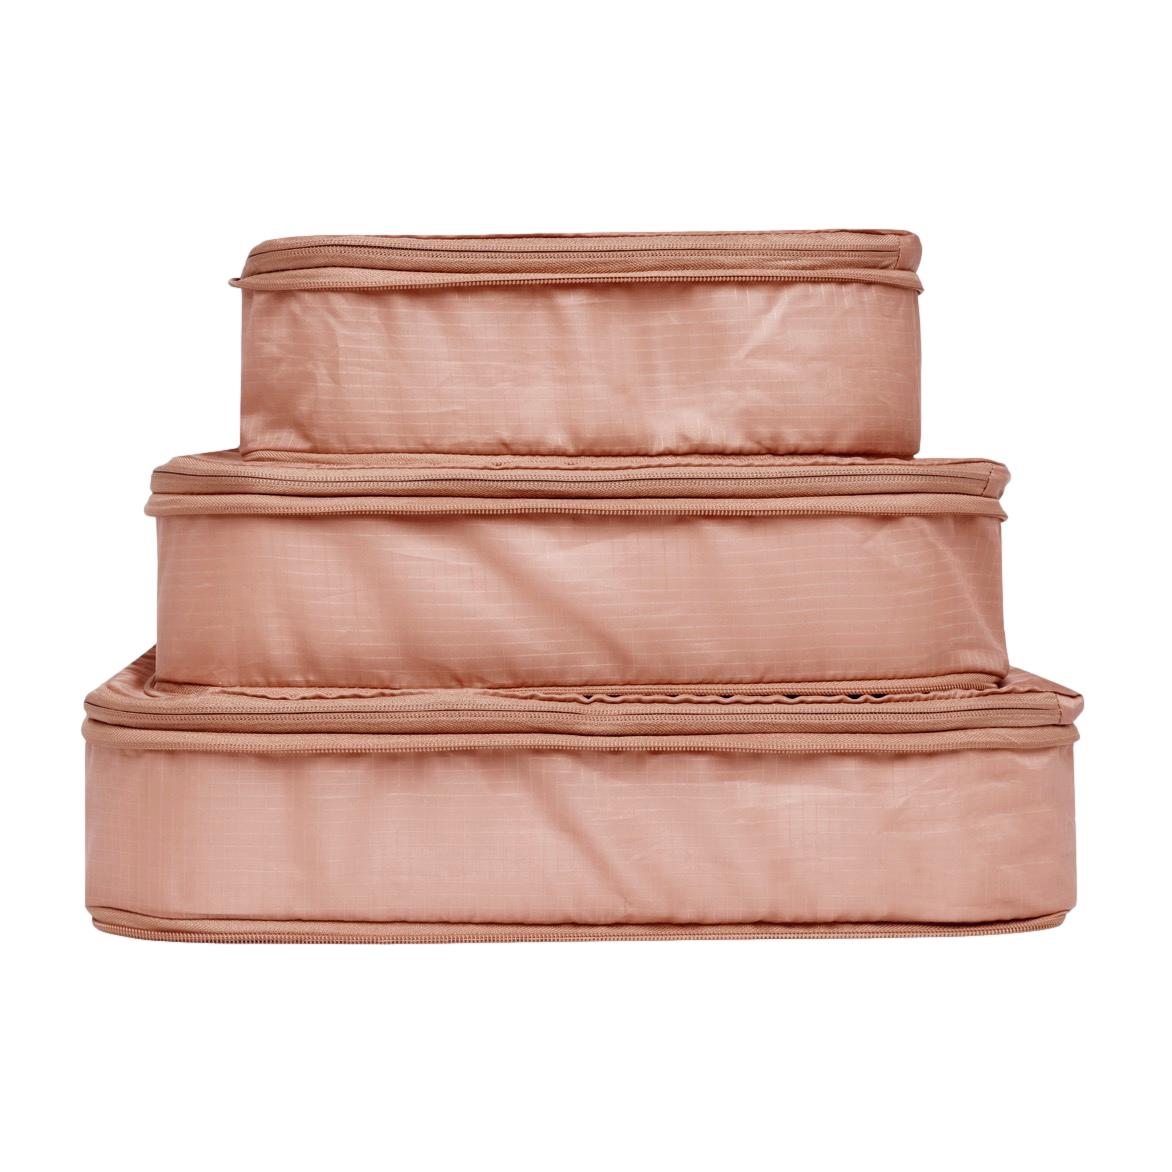 Bag-all Basic Compression Packing Cubes, 3-pack Pink/Blush